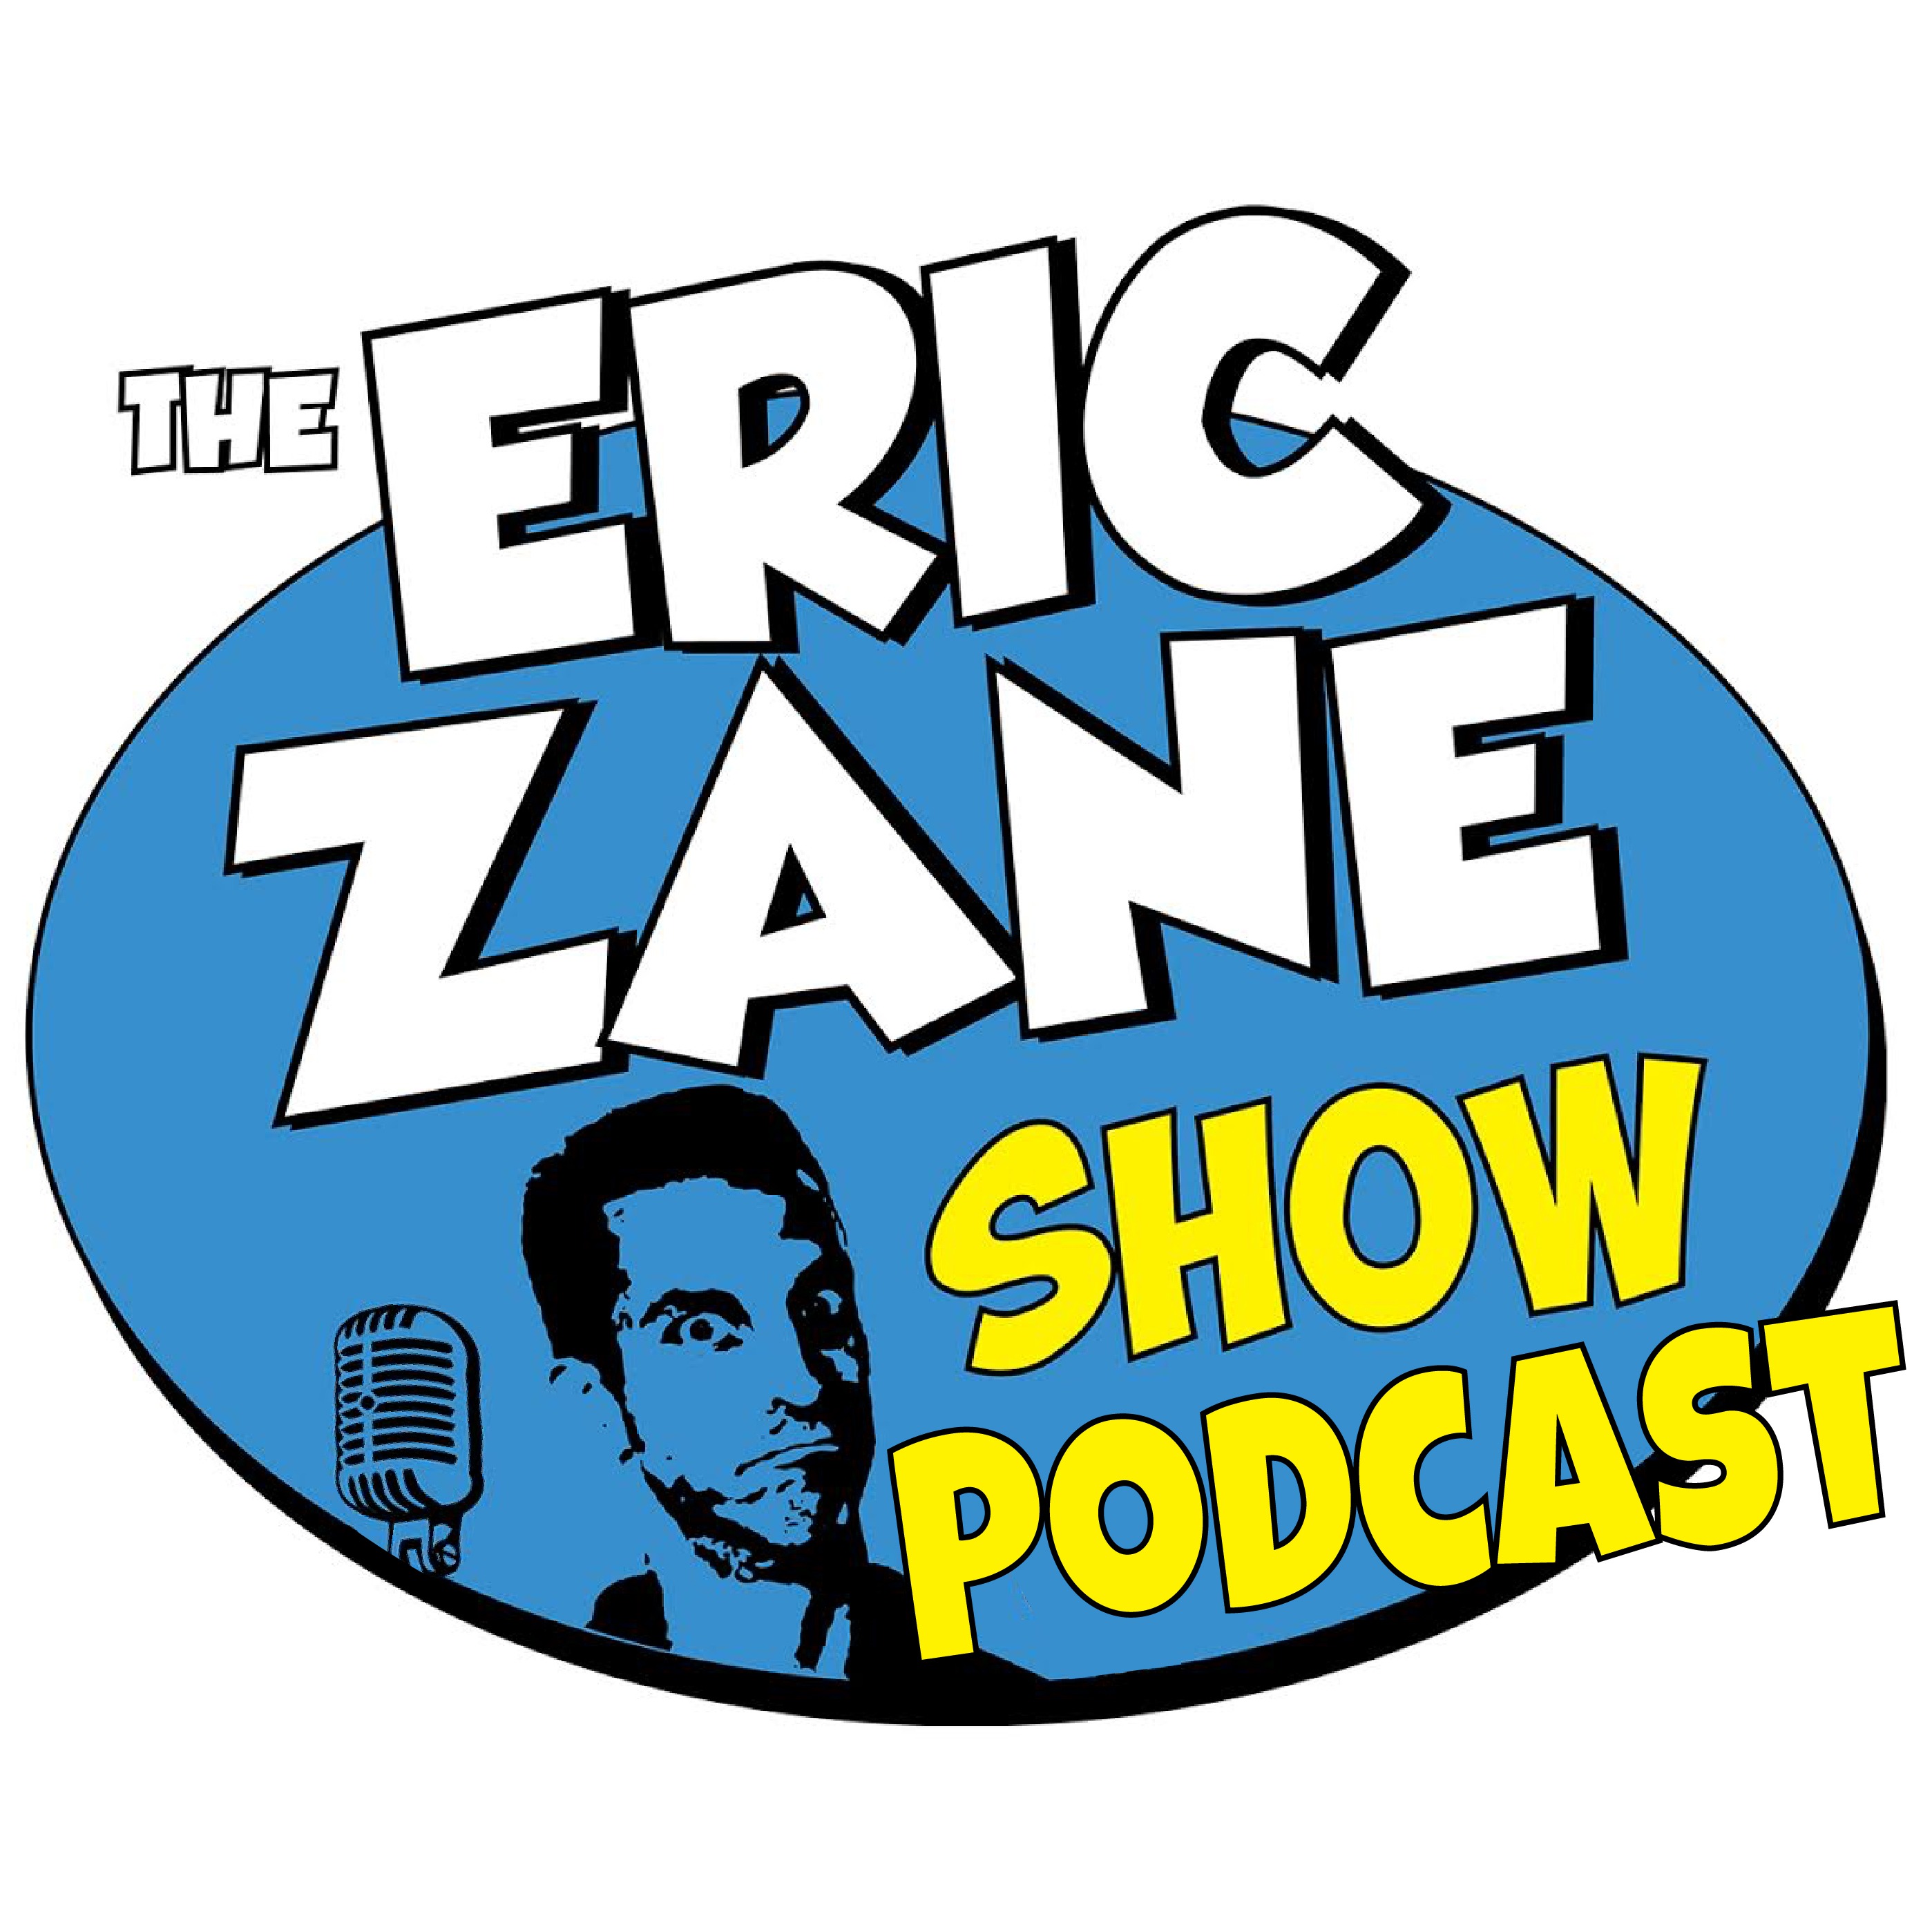 Eric Zane Show Podcast Ep 956 - Pro wrestling in the Olympics?